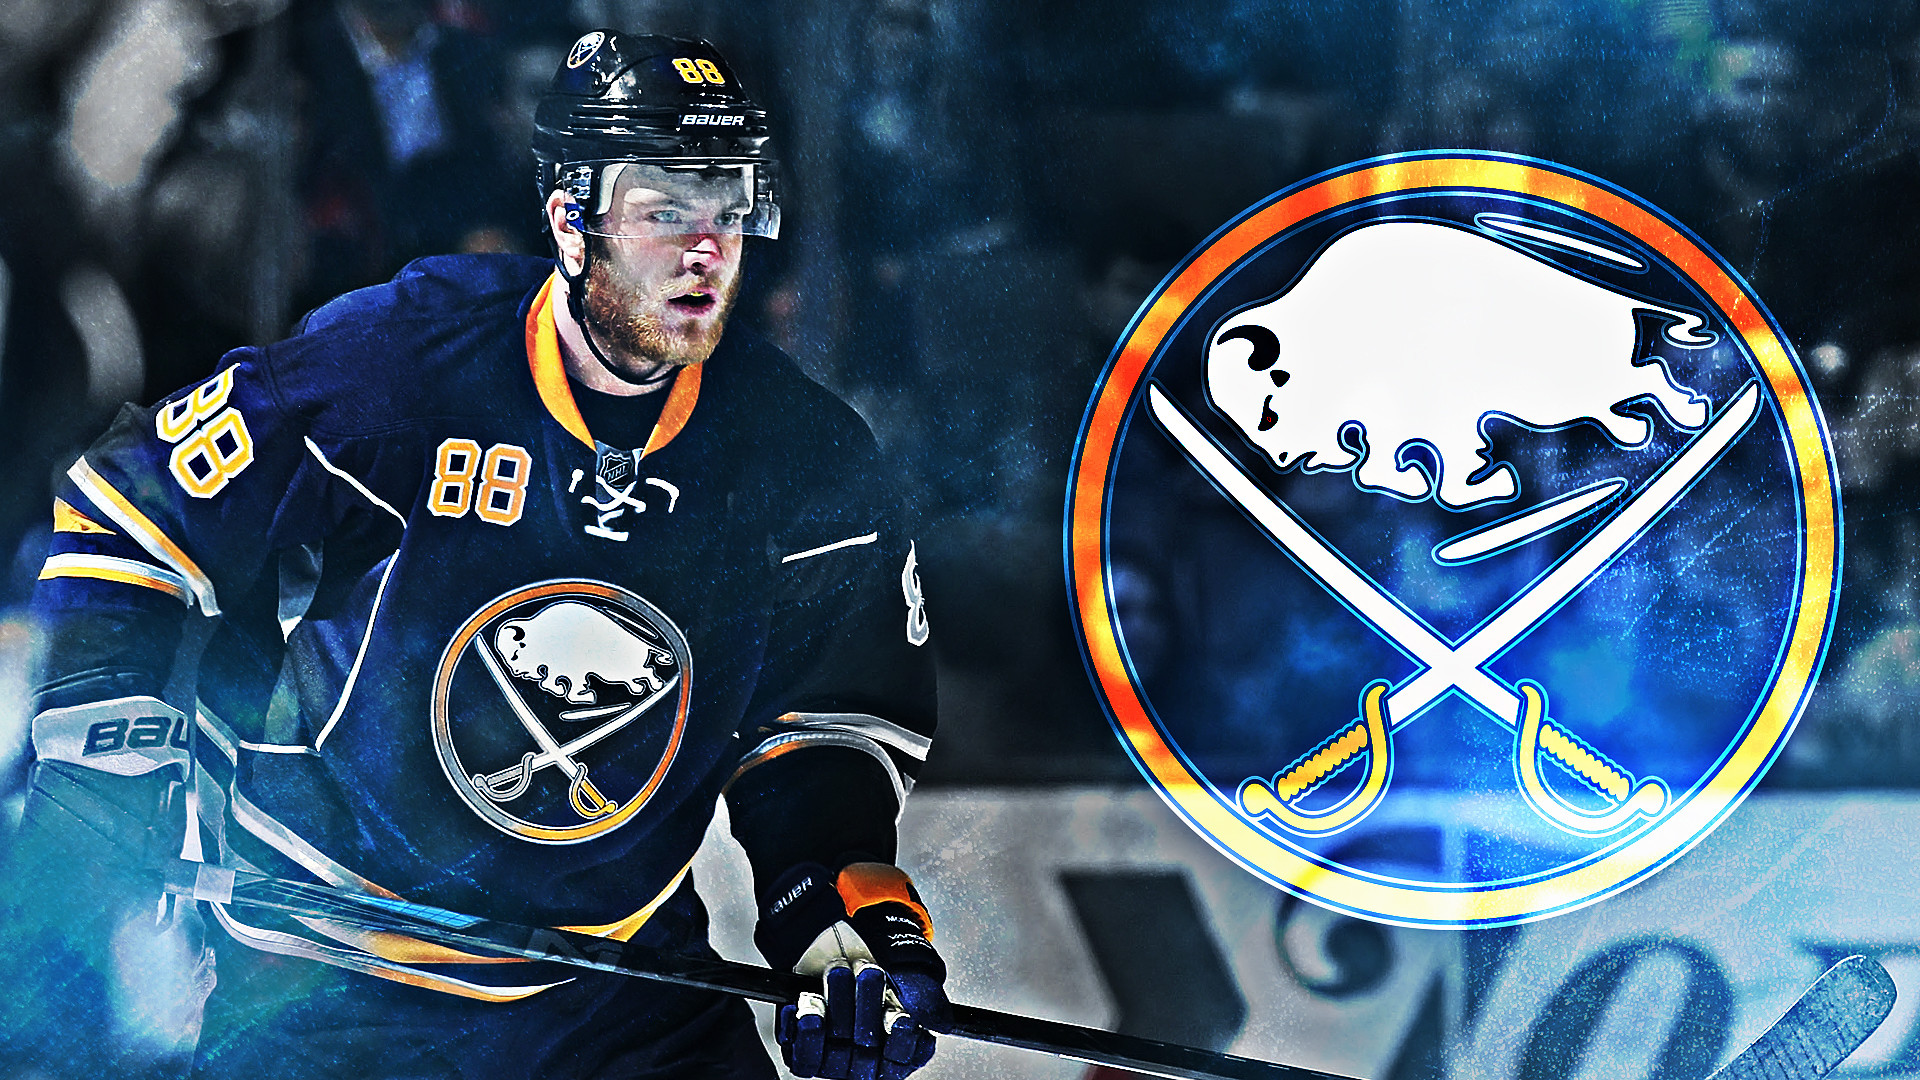 1920x1080 Sabres Schedule Wallpaper January 2016 The Aud Club Buffalo 